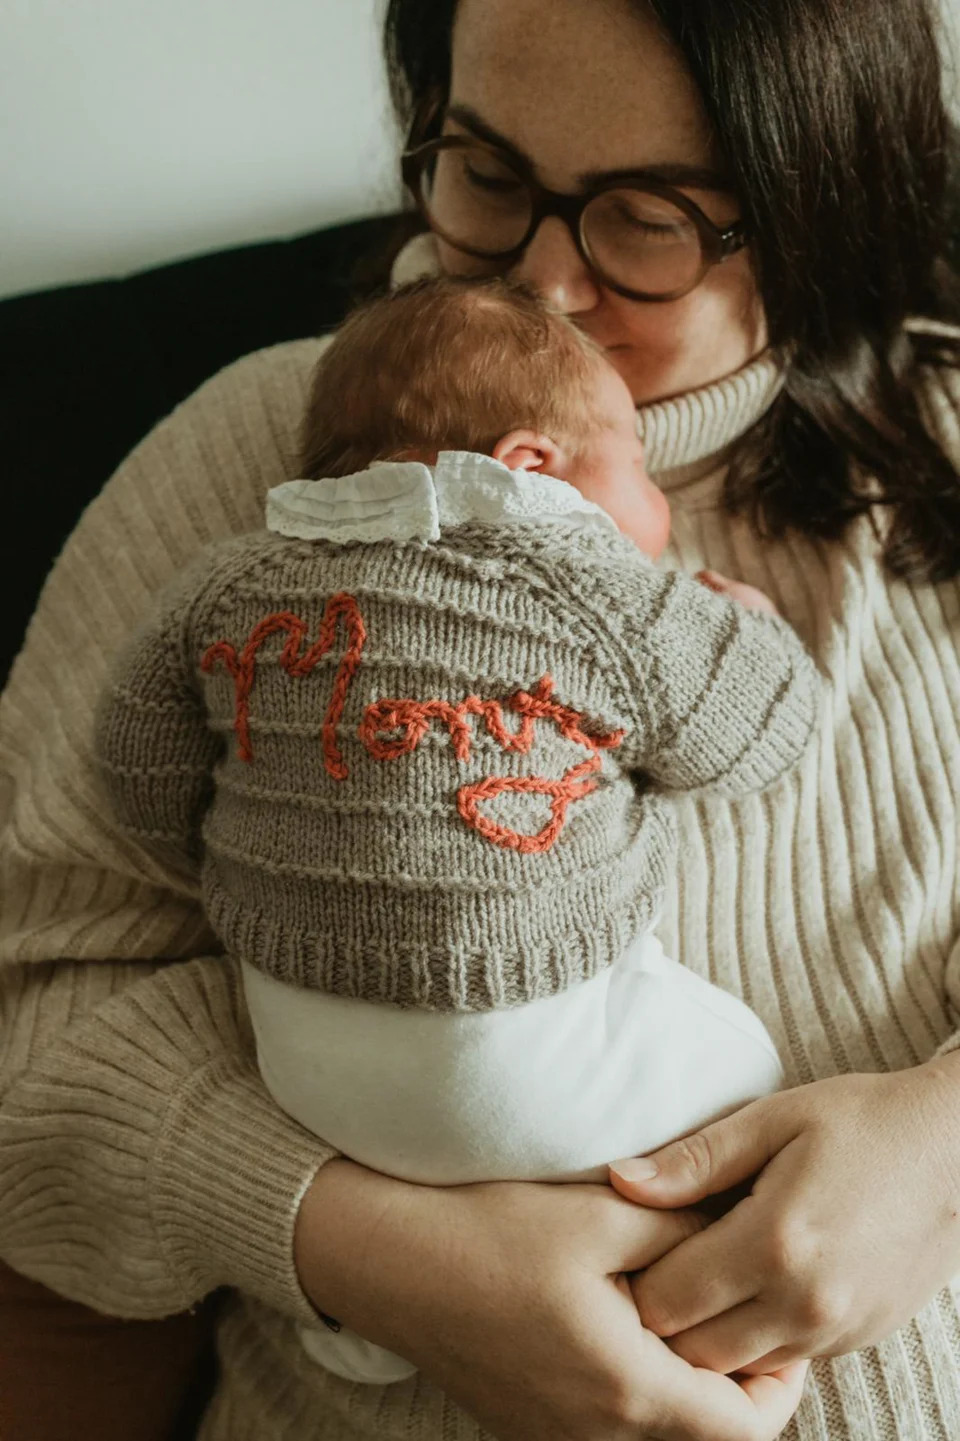 Sarah Dines with Monty as a newborn. (Madeleine Jones Photography/Caters)